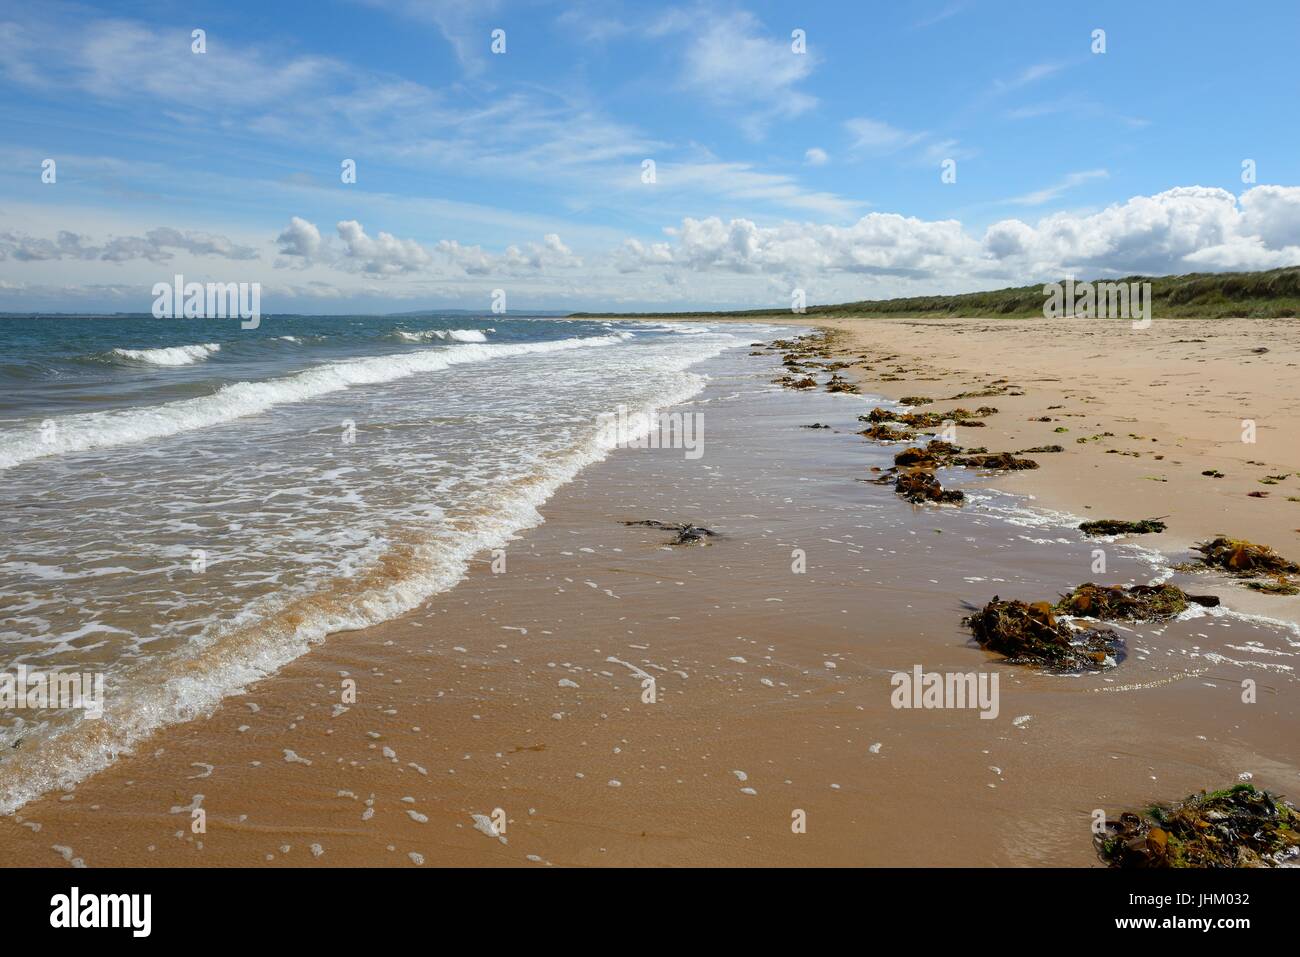 Award winning Dornoch beach, Sutherland, Scotland, after high tide and strong wind leave clumps of seaweed along the shore. Stock Photo